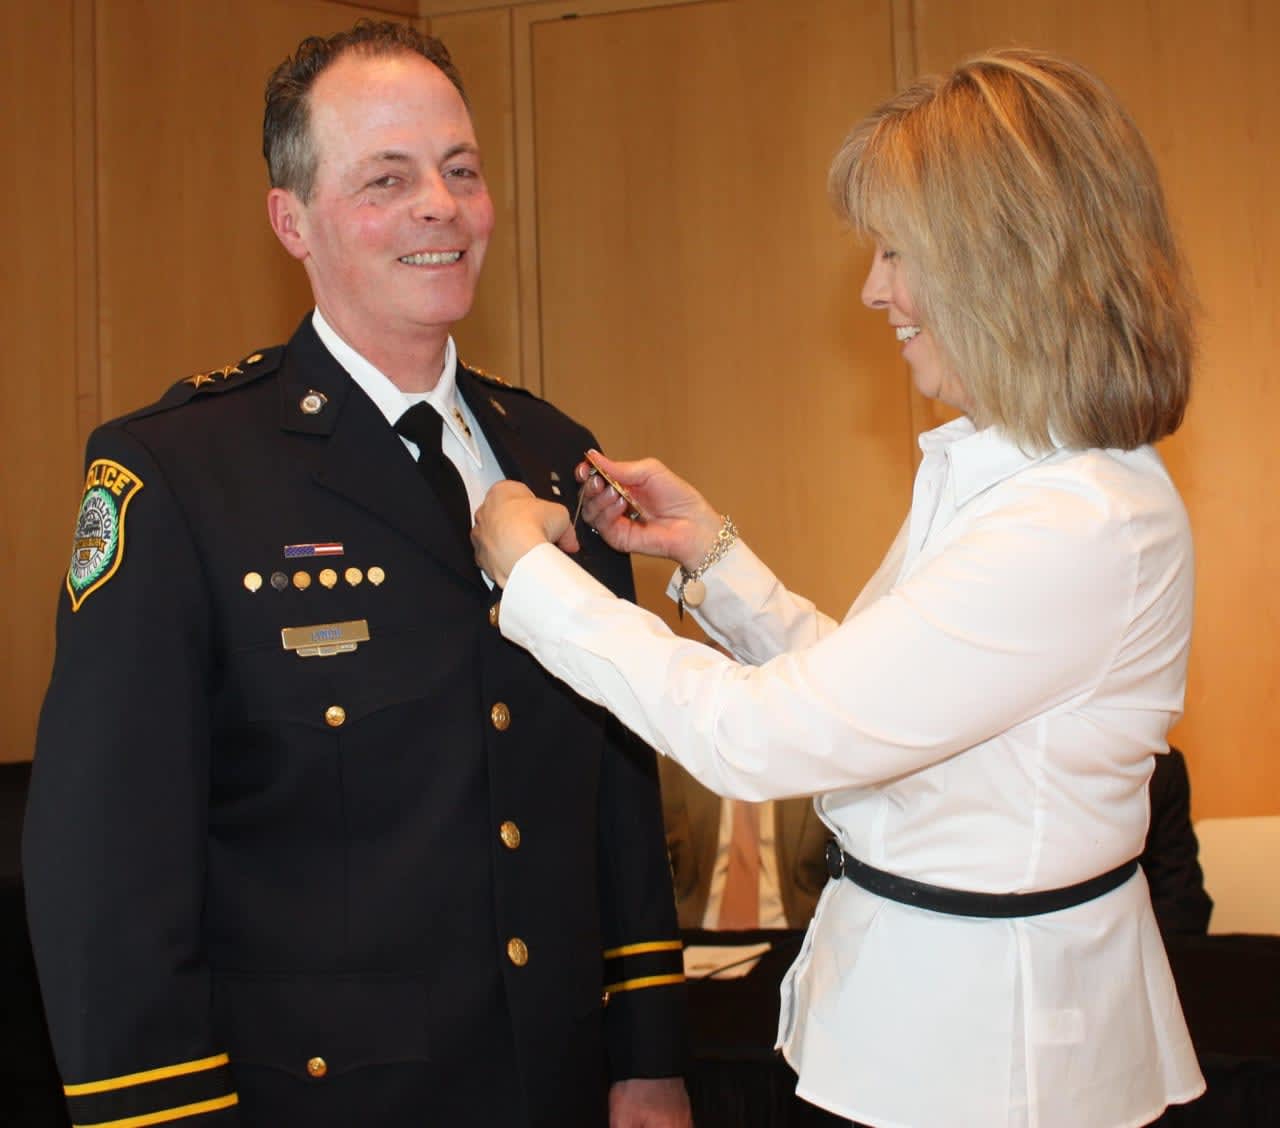 New Wilton Police Chief John Lynch is presented with his new badge by his wife, Ann.